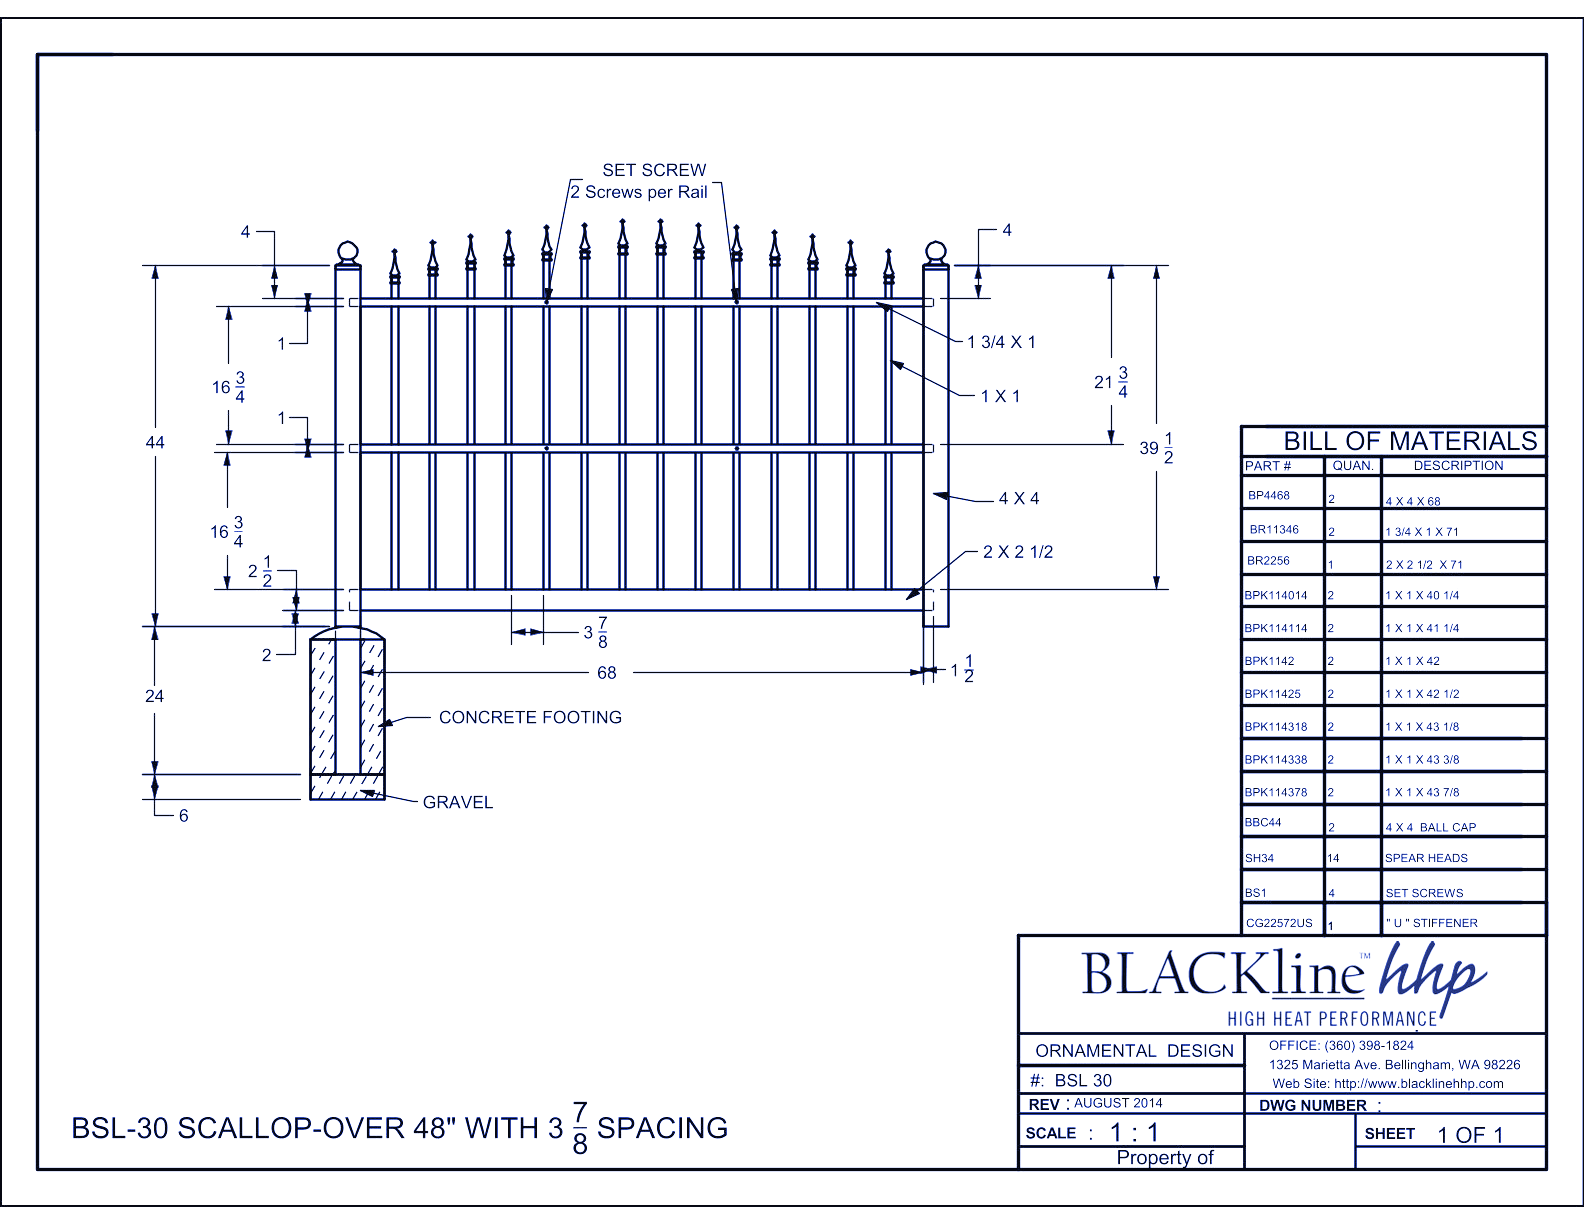 BSL-30: Scallop-Over 48" with 3 7/8” Spacing